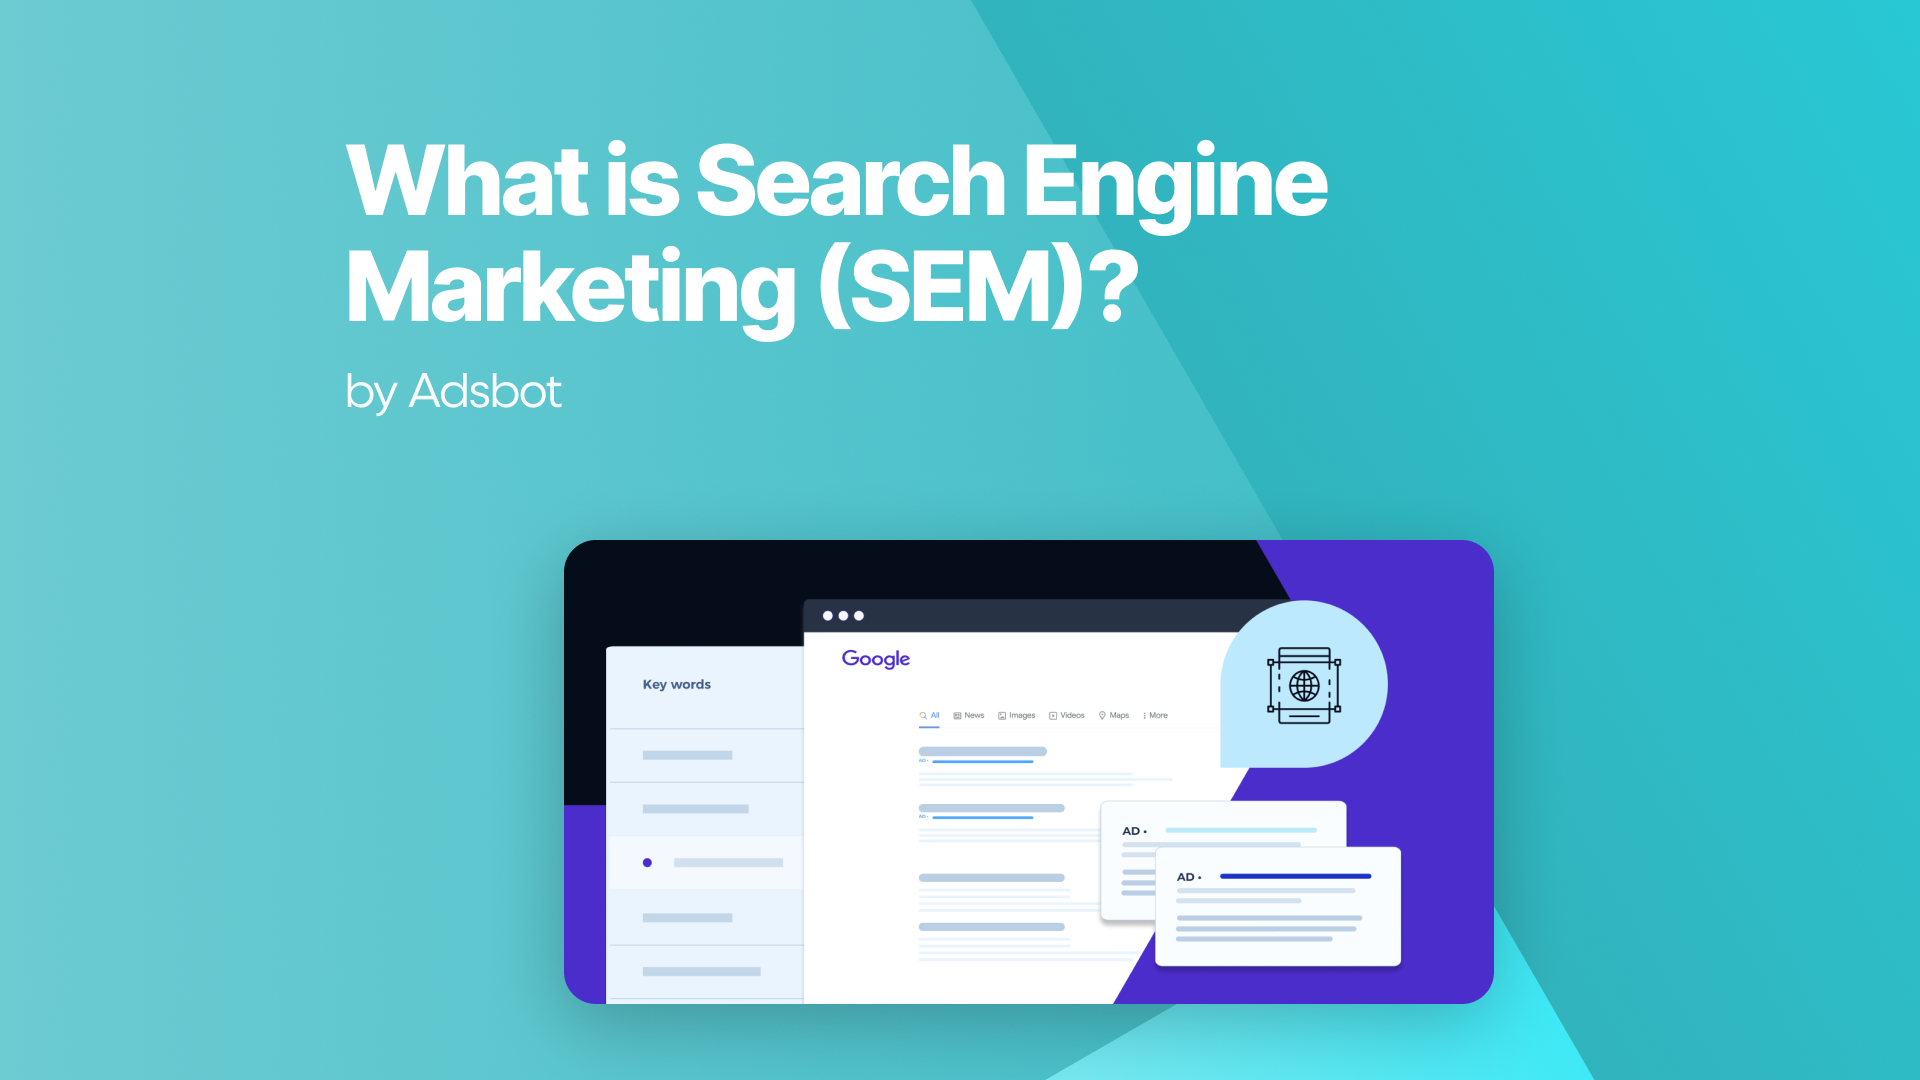 What Is Search Engine Marketing (SEM)?